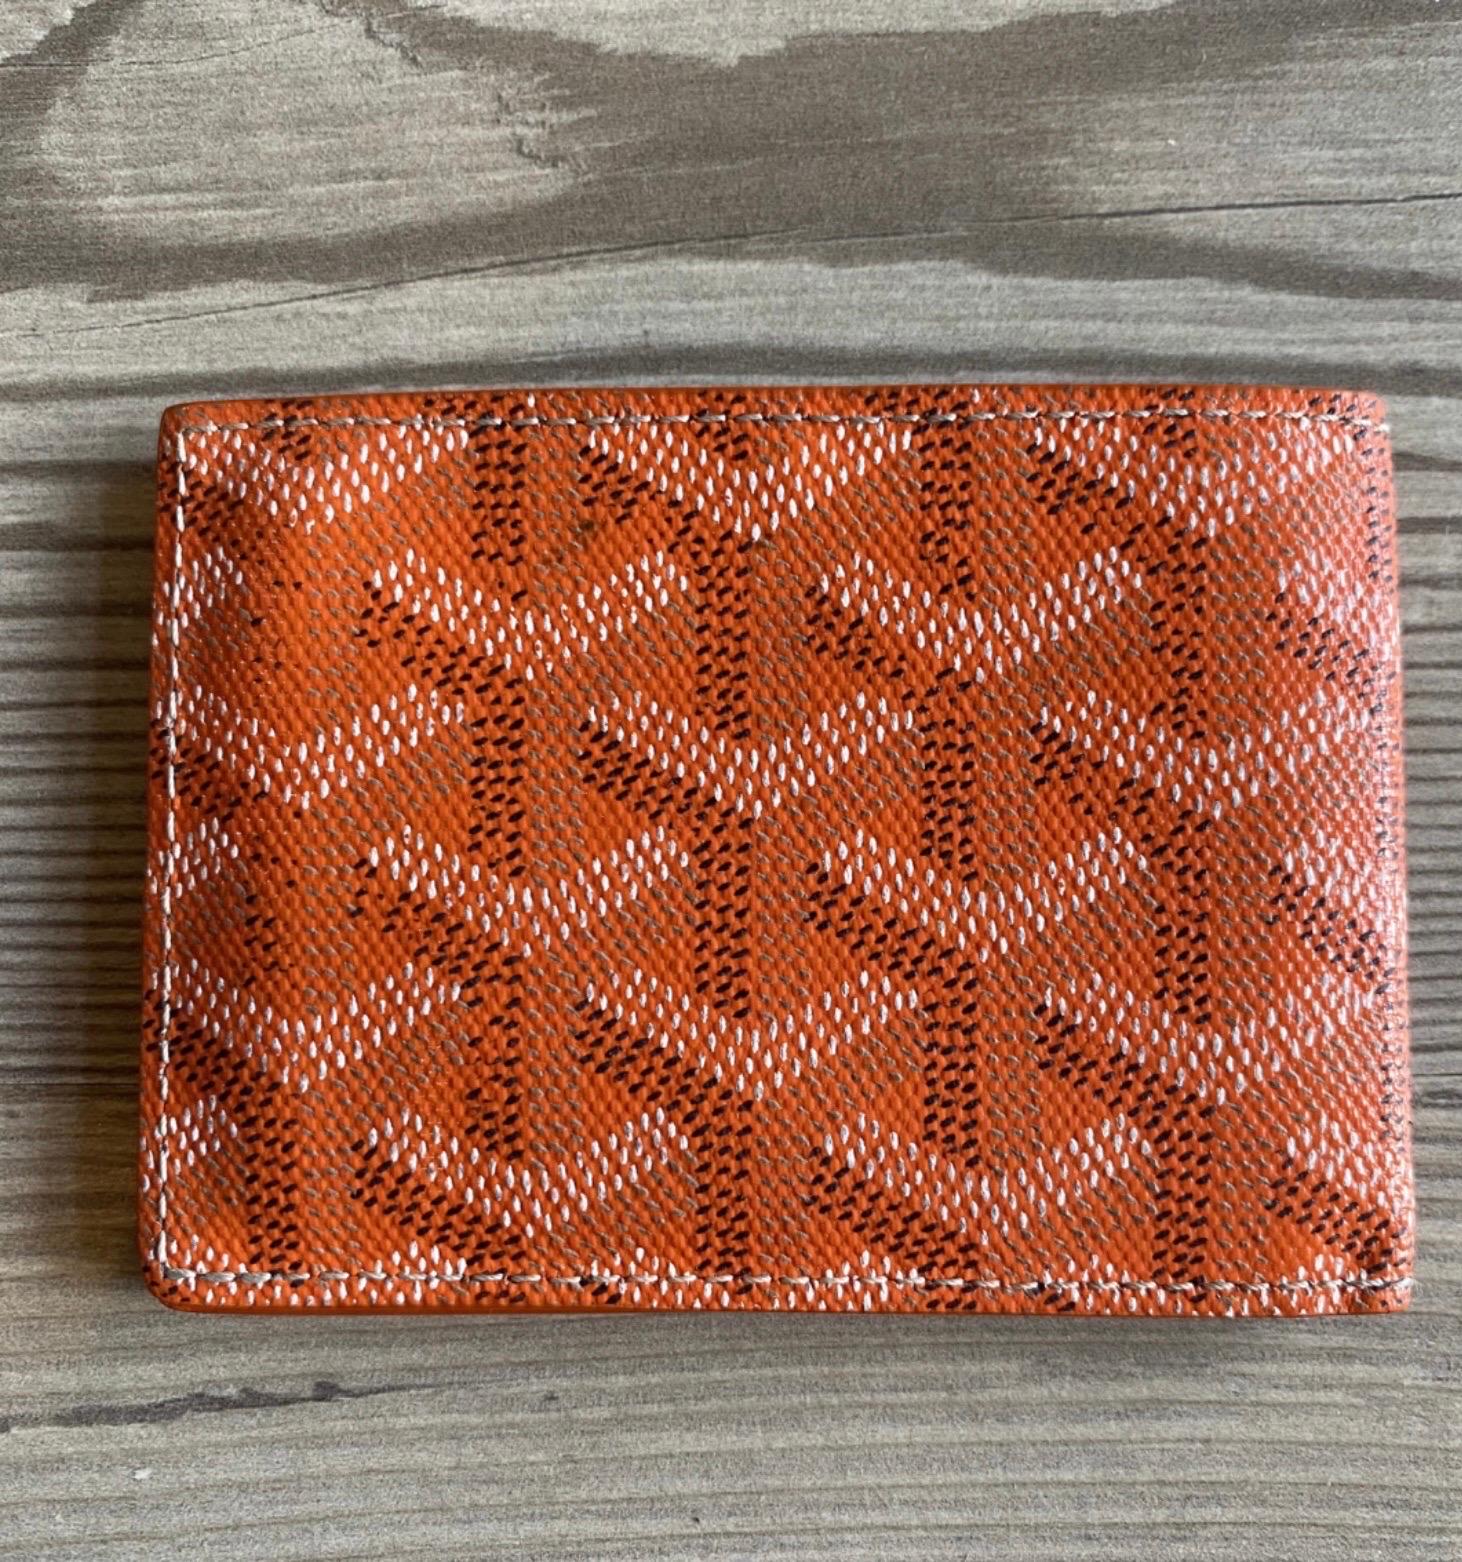 Goyard card holder. in orange leather with box and tag. measures:
Height 7 cm
length 10 cm
Excellent condition, like new